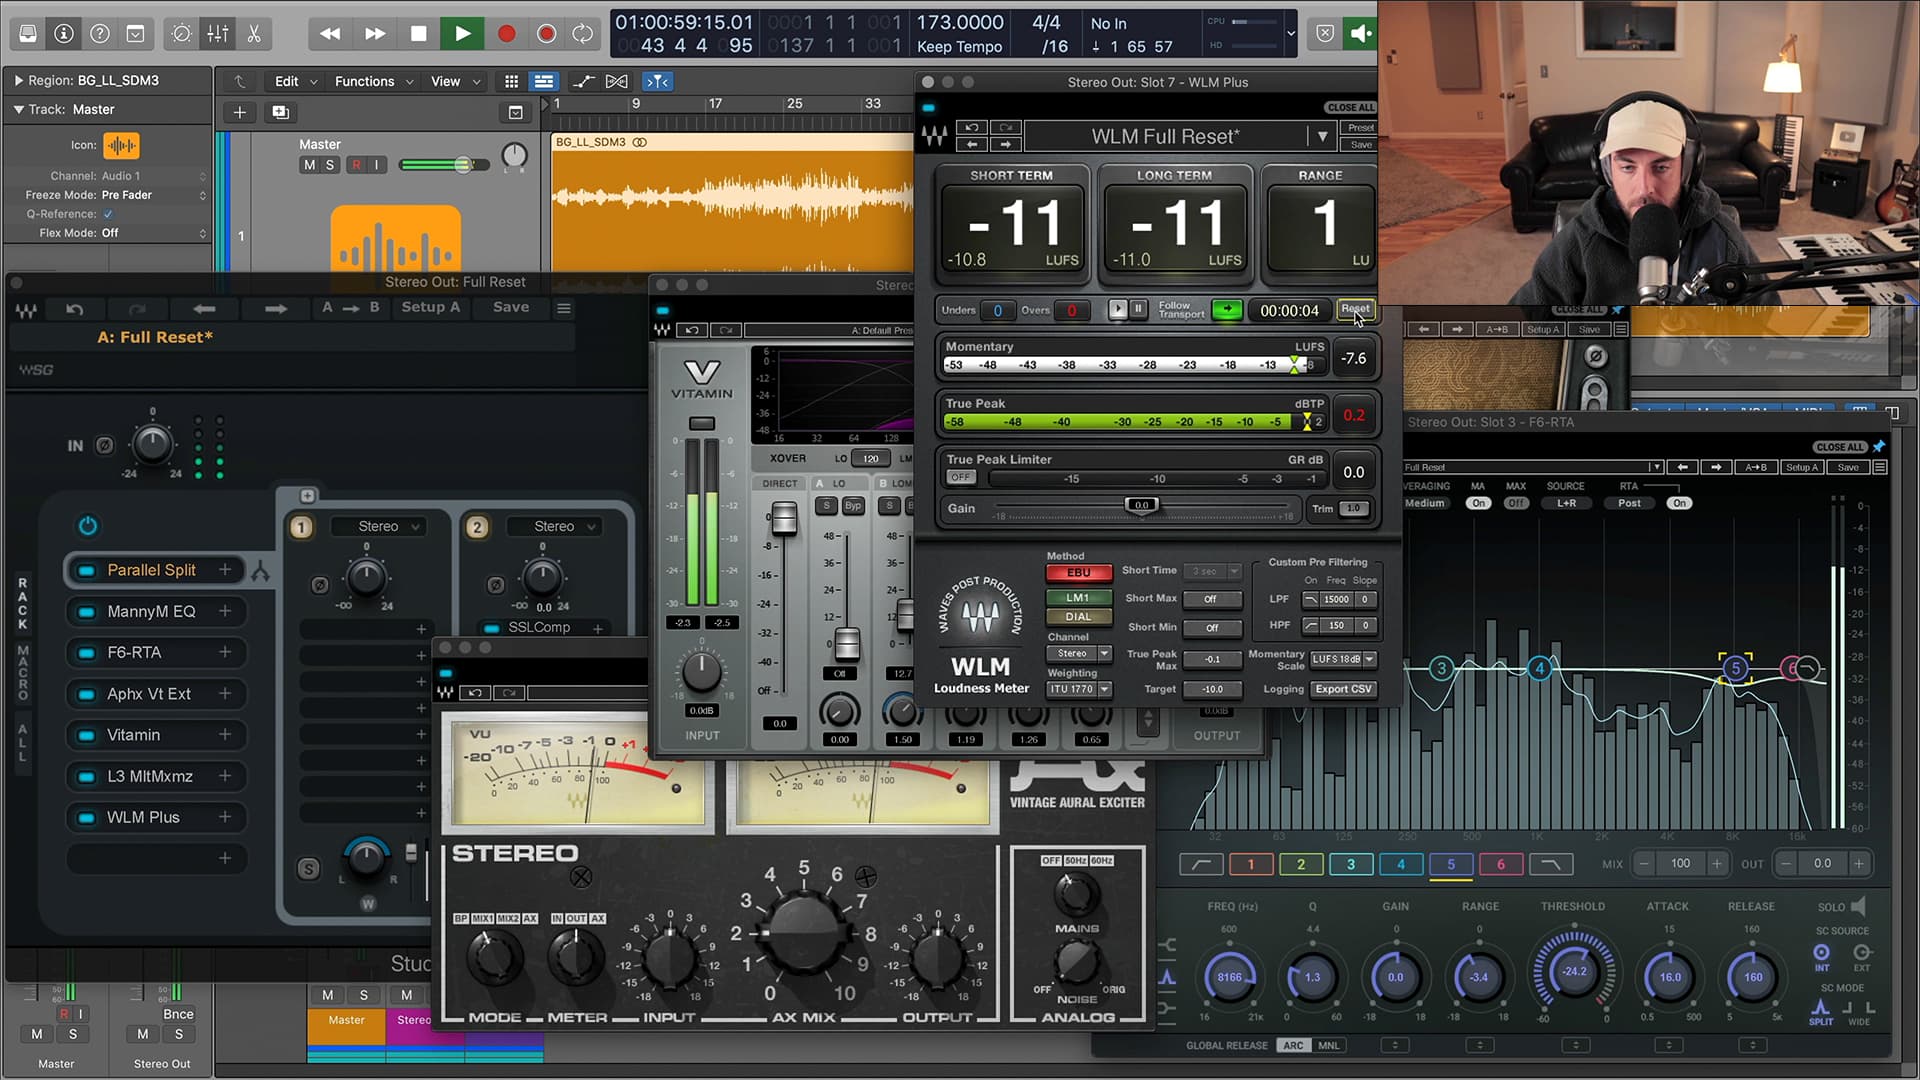 Tutorial: Next Level Mastering with Waves Plugins + Free Presets